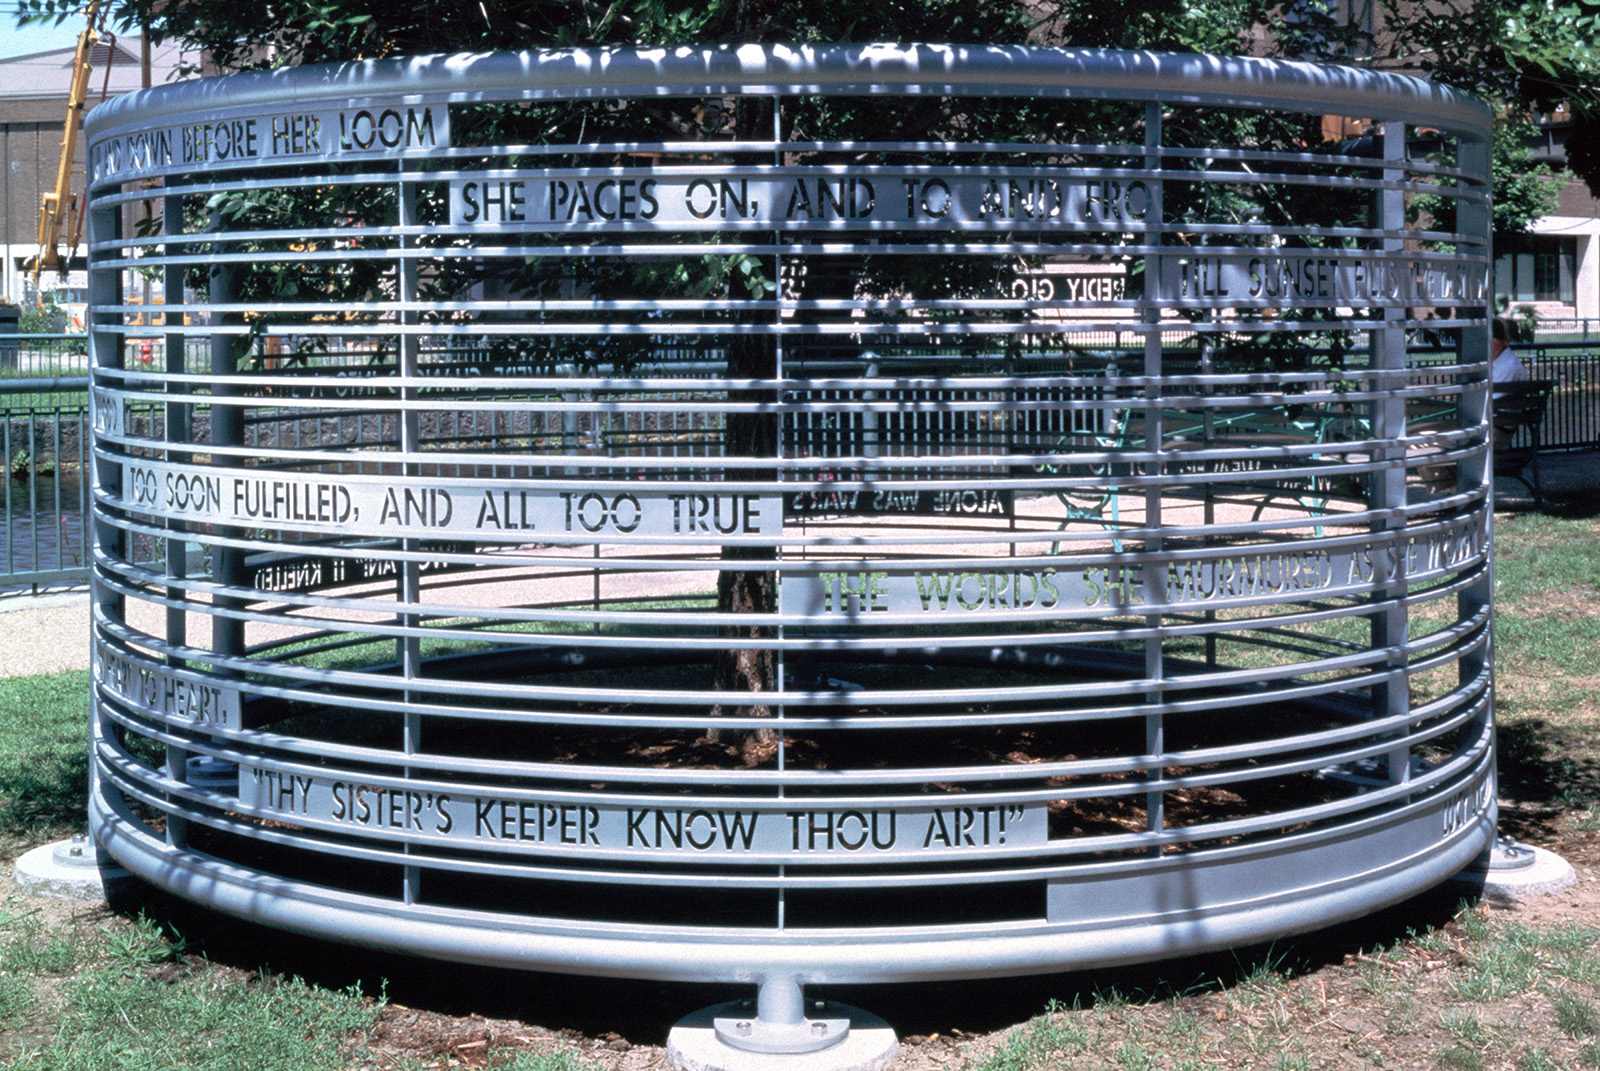   Circular Fence Sculpture with Poem , installation view, 1997. Photo: B.T. Martin 